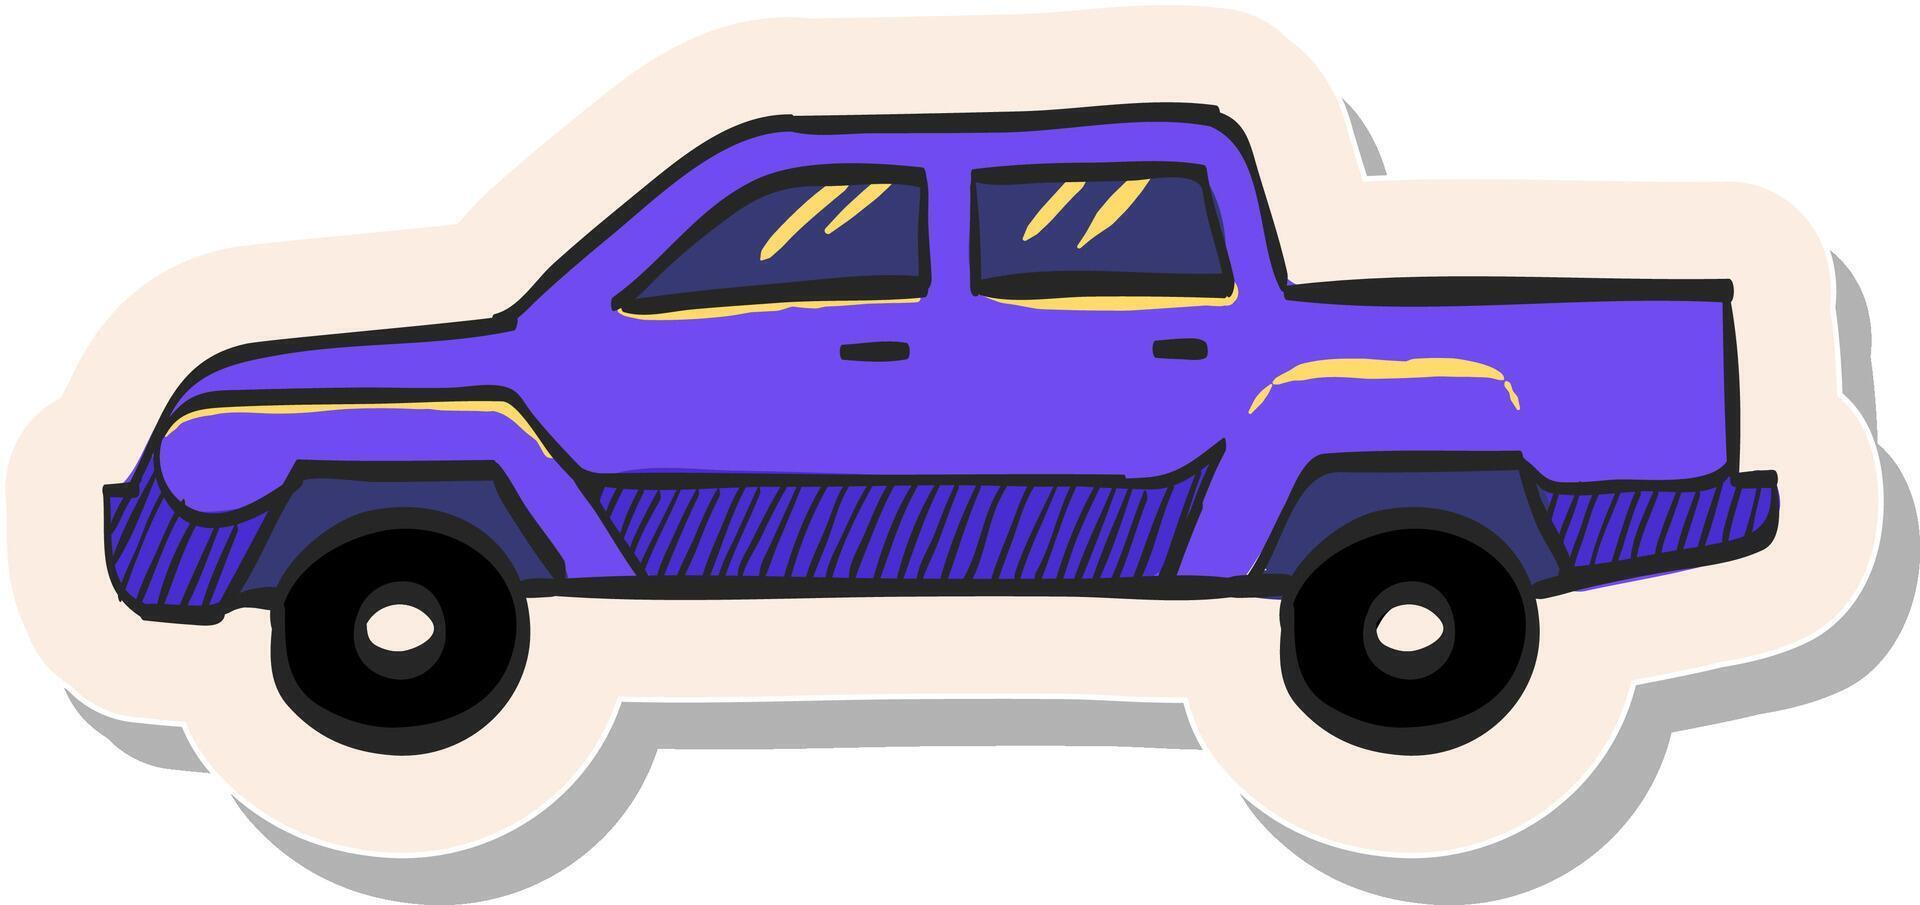 Hand drawn Car icon in sticker style vector illustration